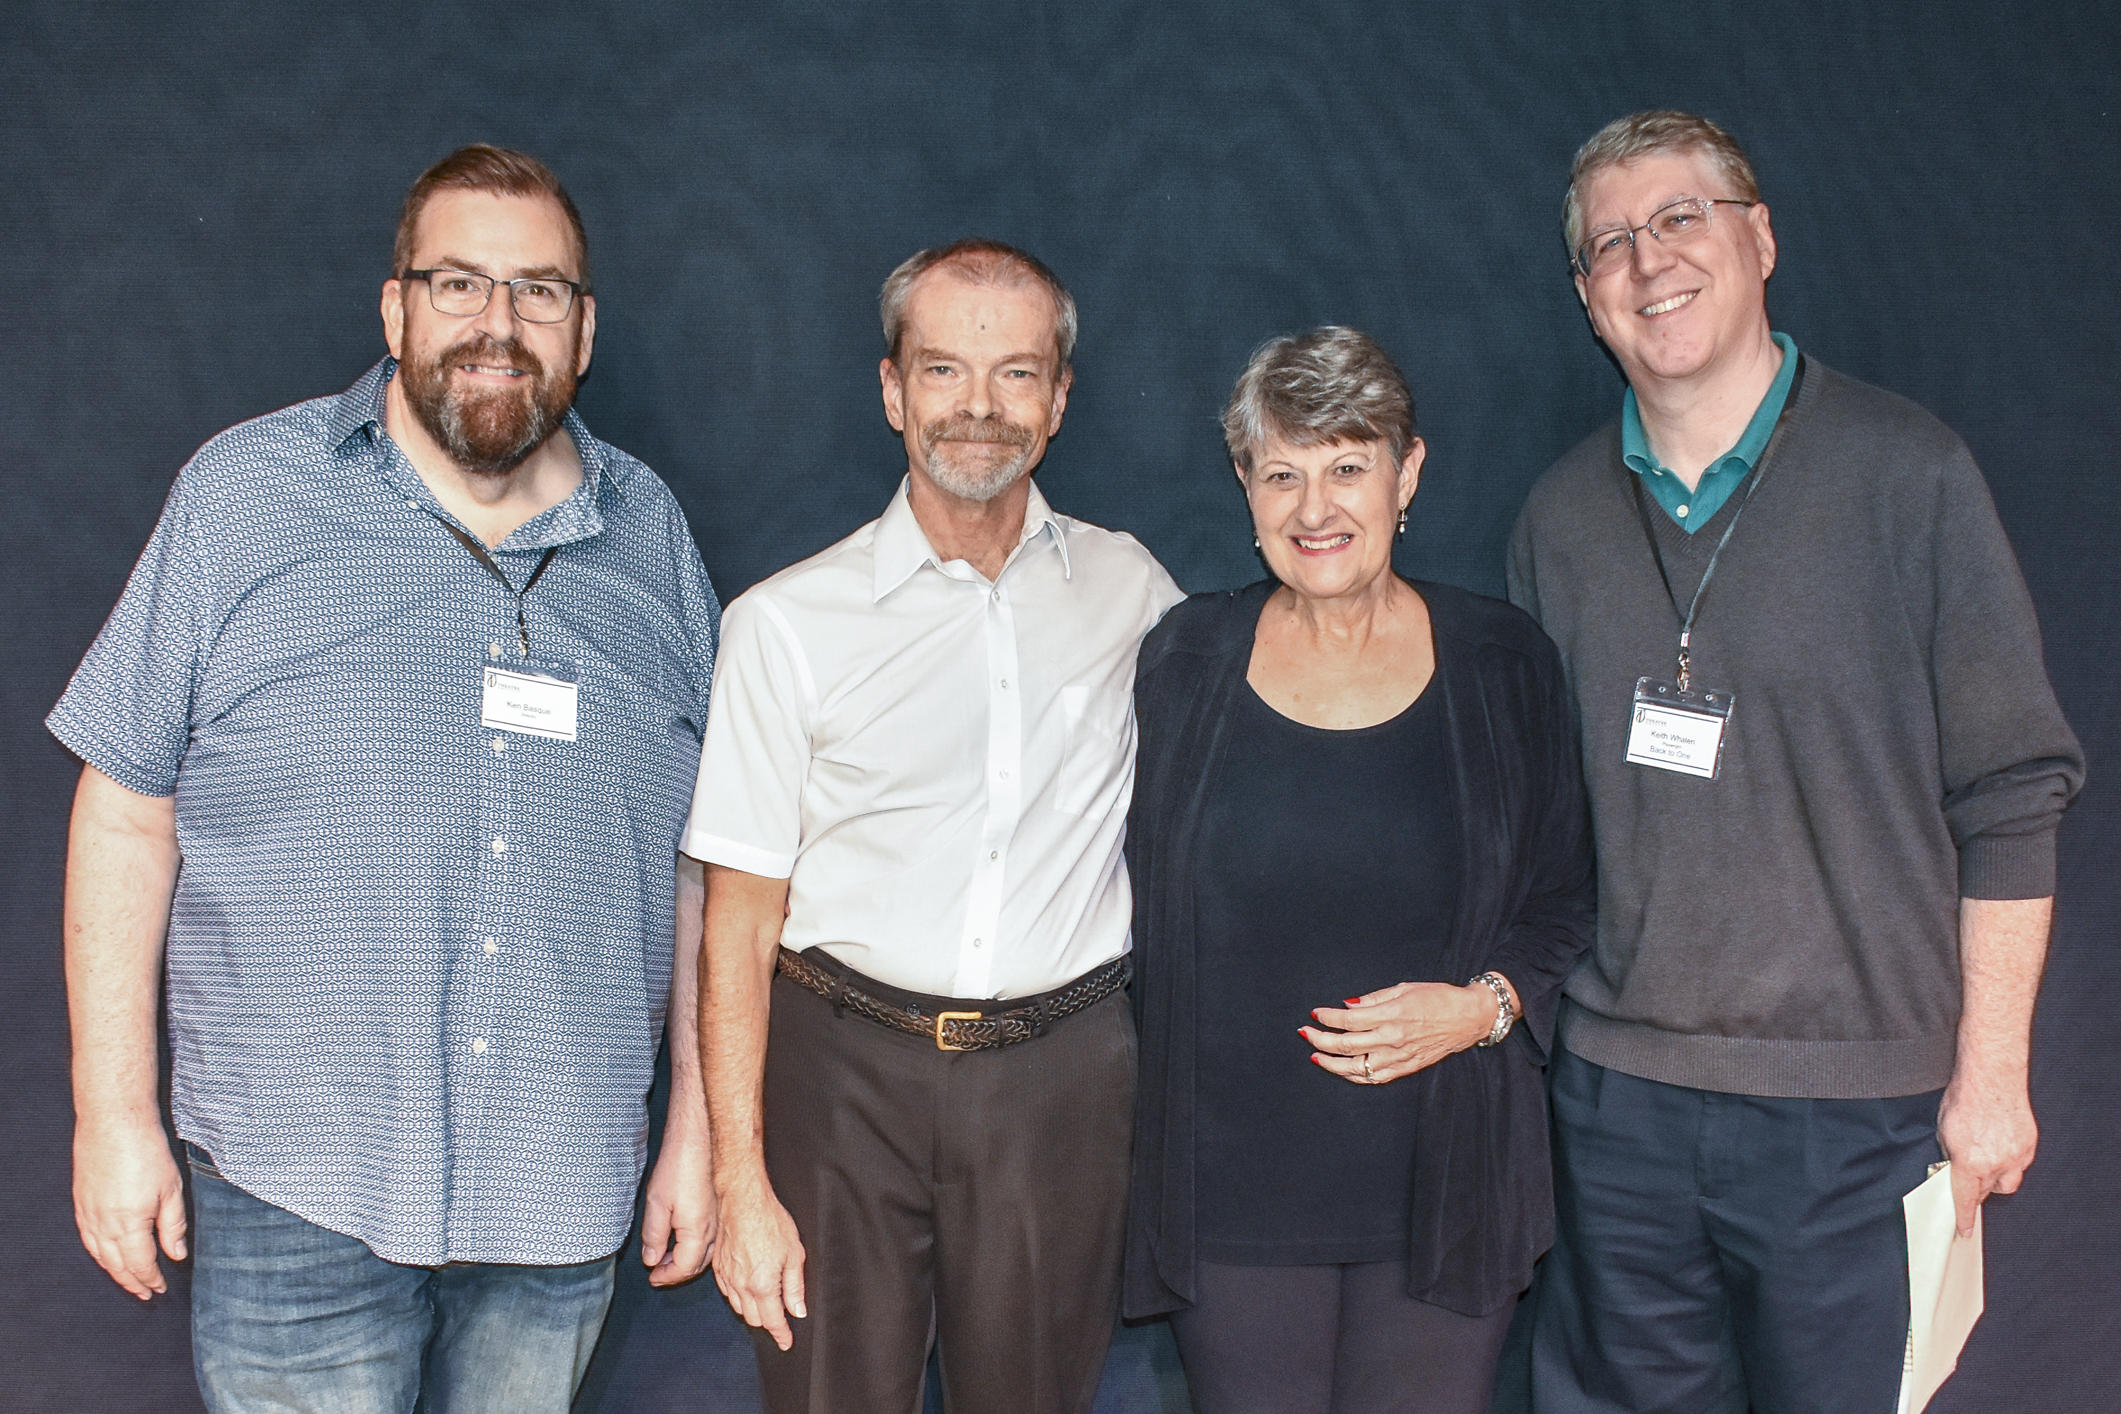 BACK TO ONE: Director Ken Basque, Eric Henry, Susan Bachman, playwright Keith Whalen. (Not pictured: Rik Robertson.)